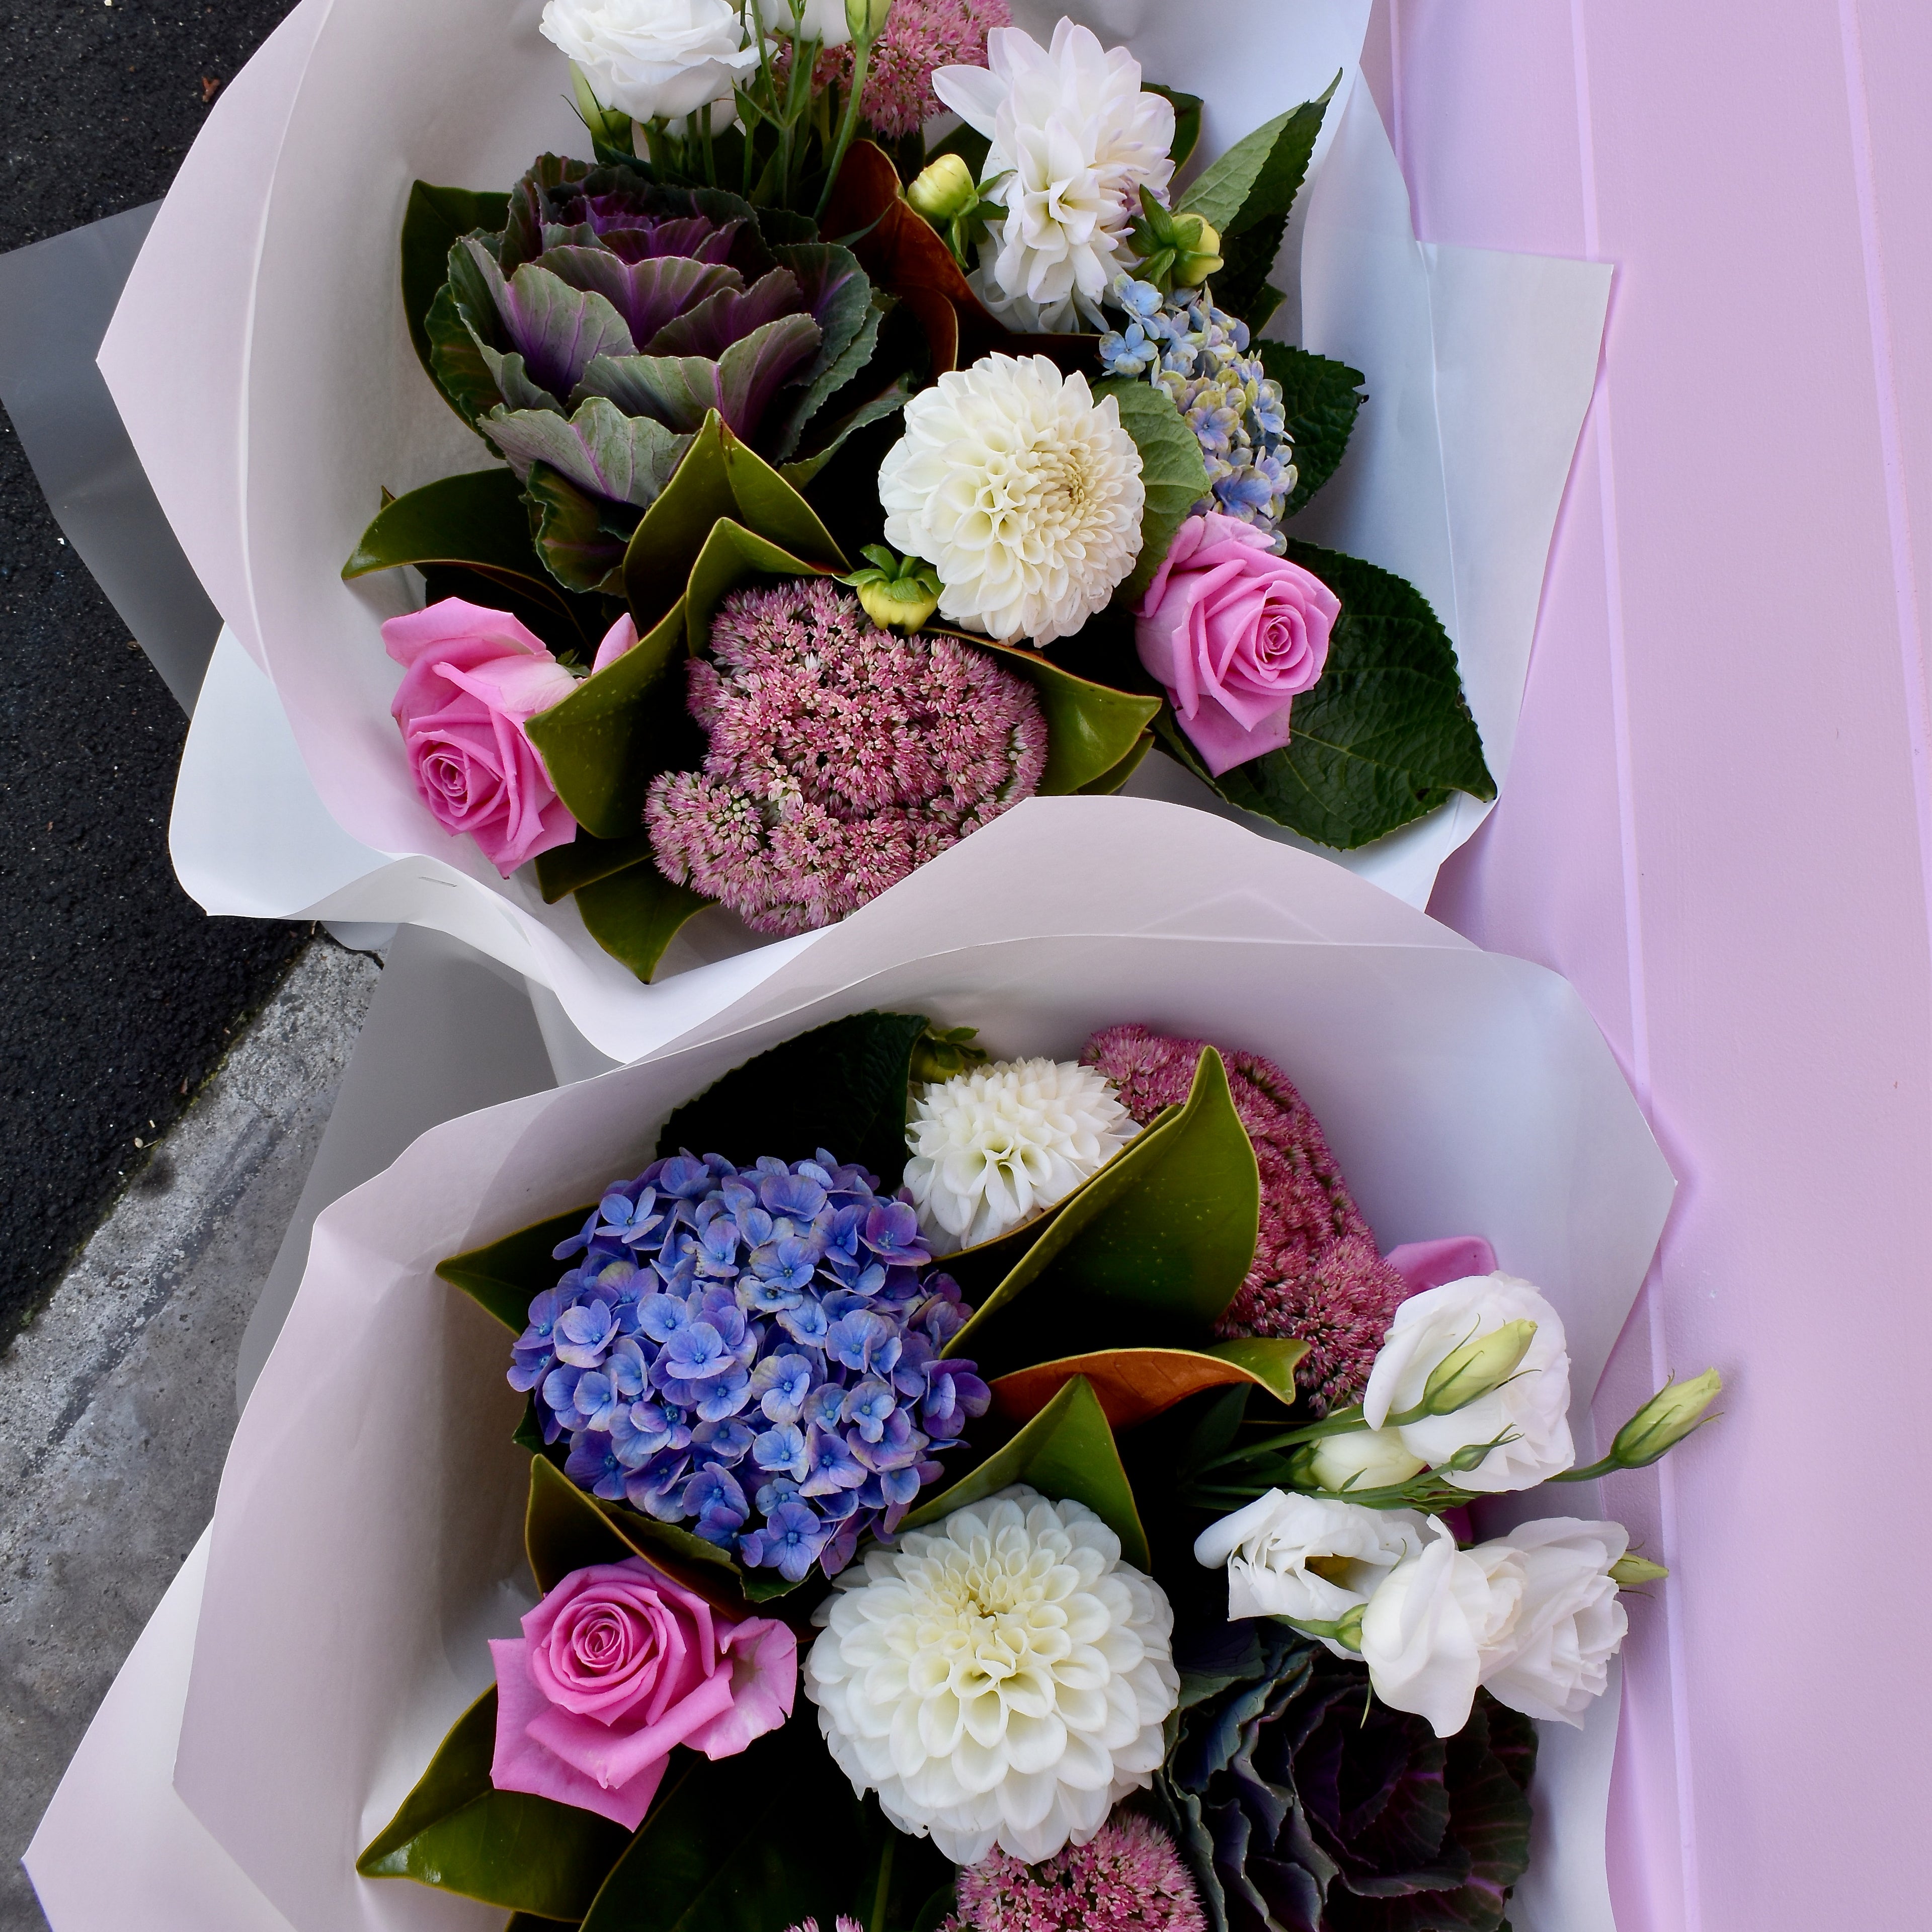 Two flower bouquets with pink roses and white paper